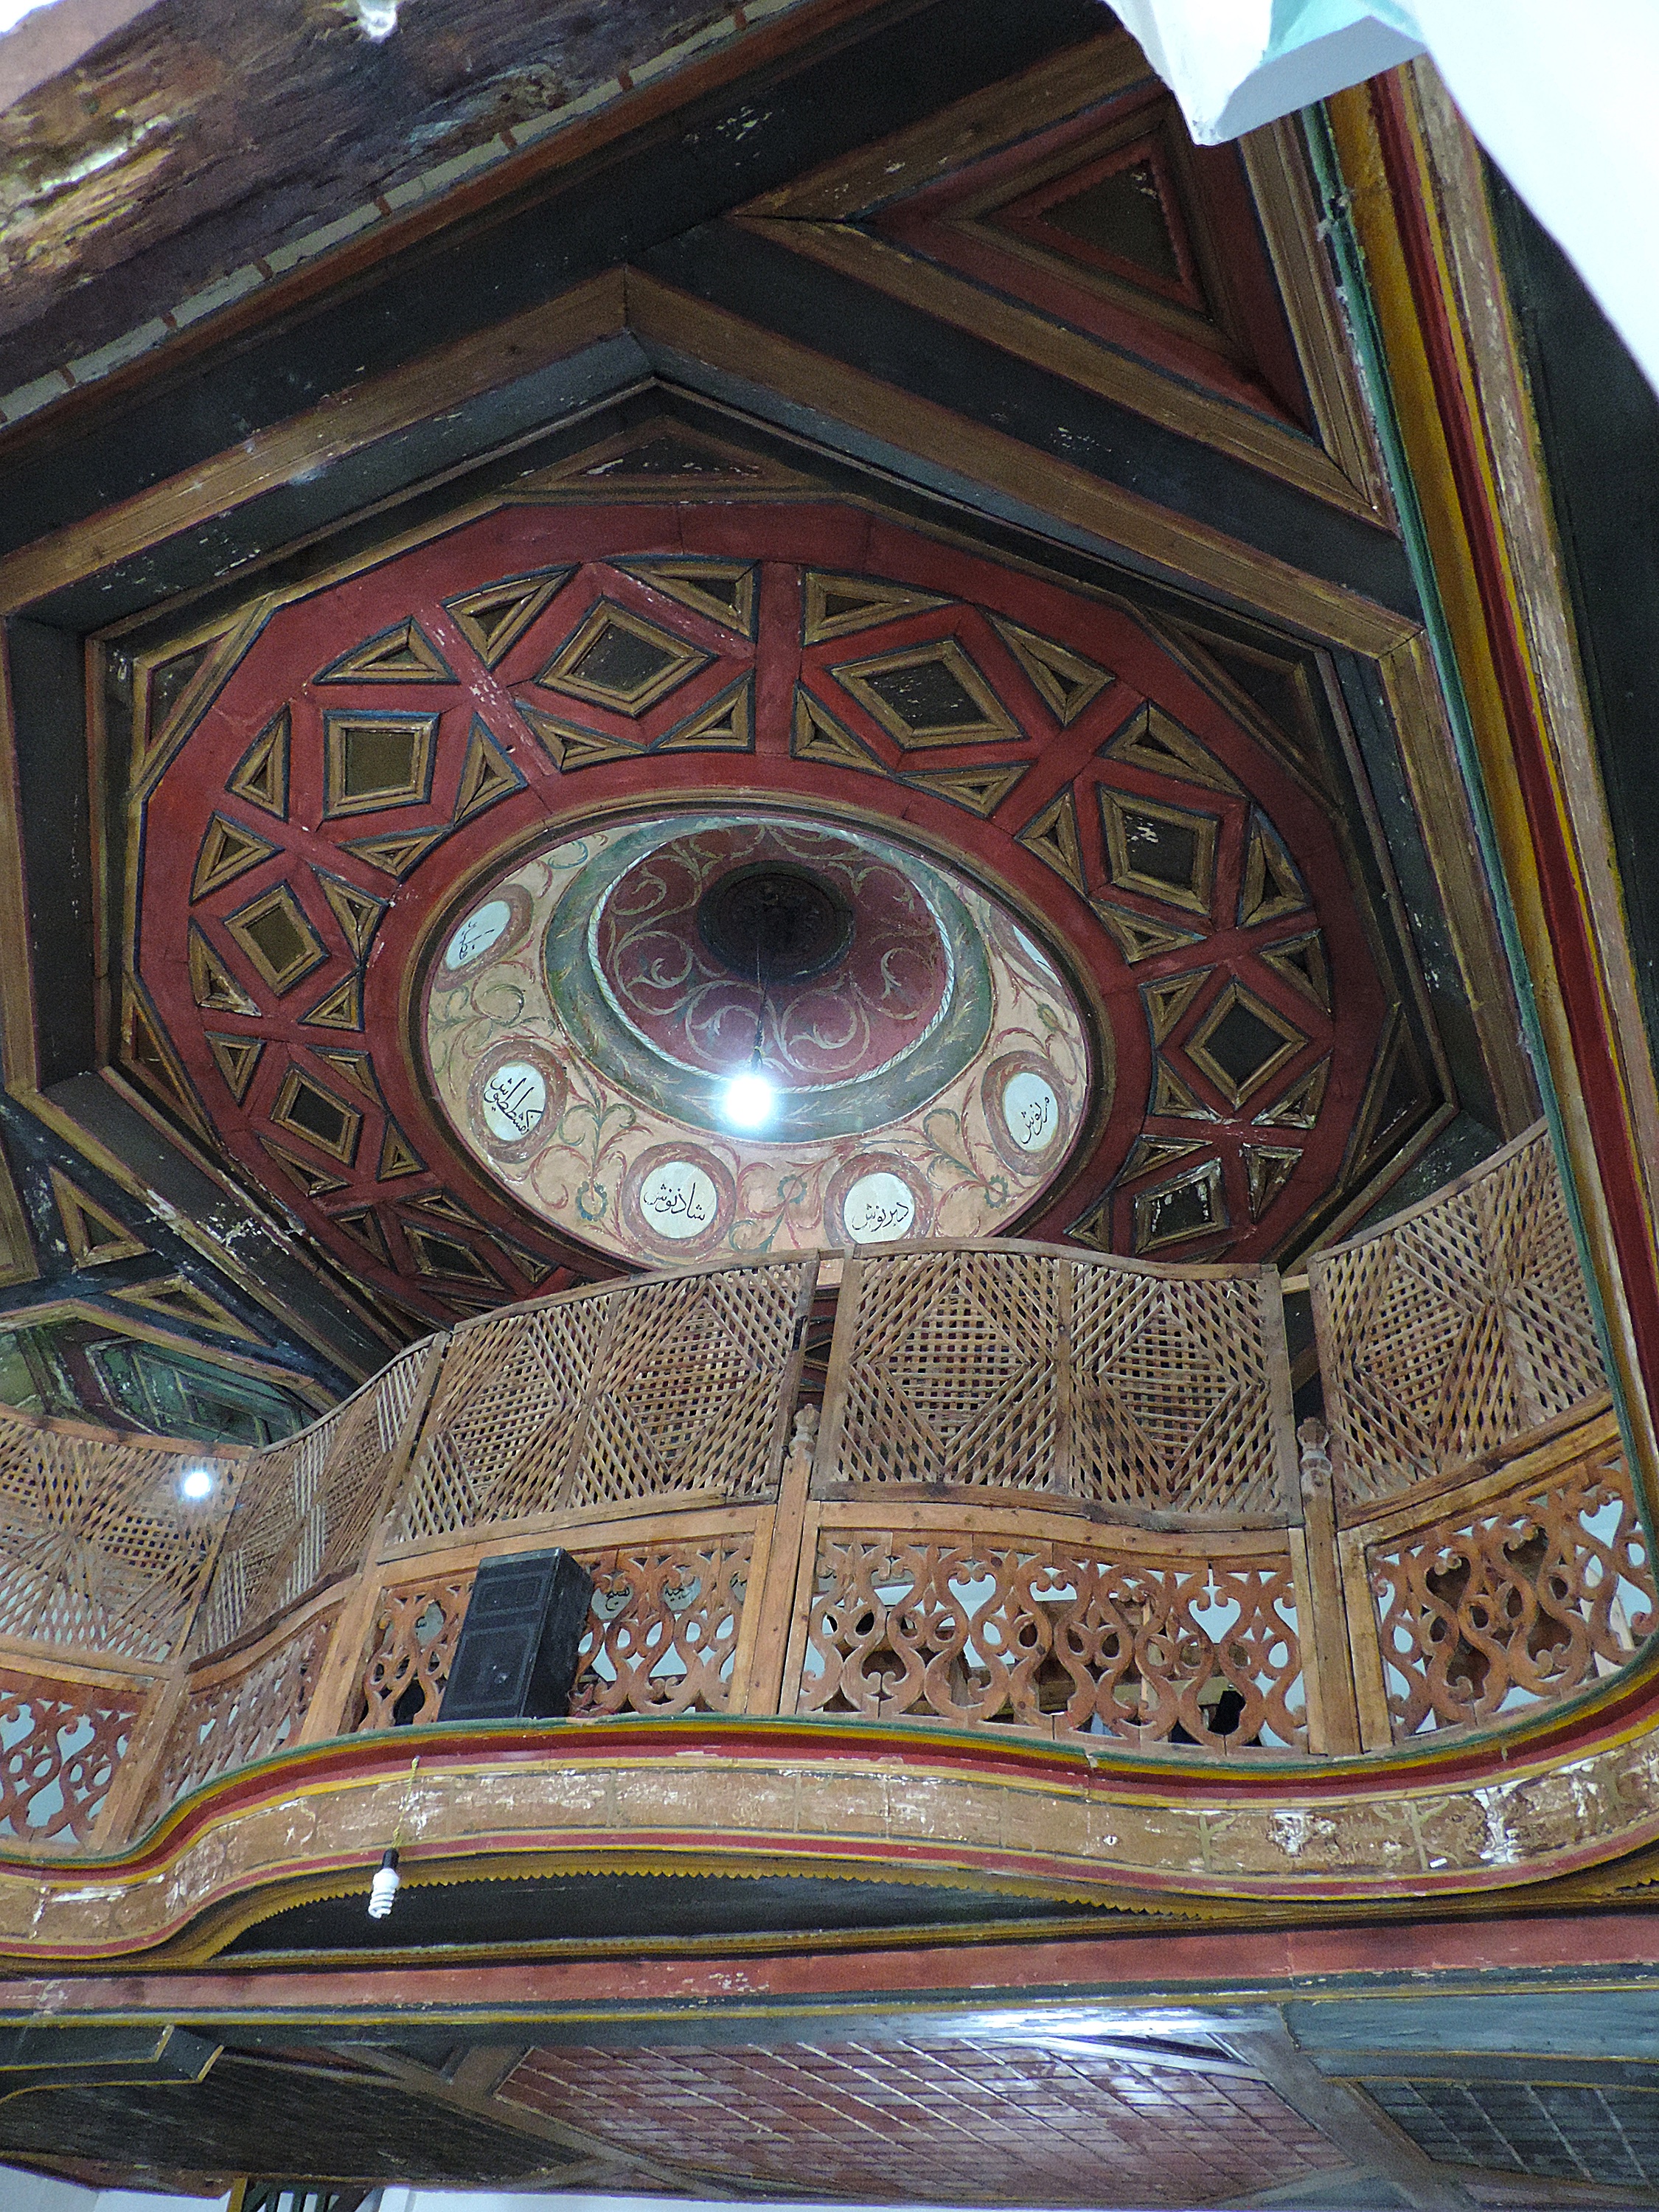 <p>Berat's reputation for woodcarving is revealed in the interior of the Sultan Bayezid II Mosque, of the late 15th century and one of the oldest mosques in Albania. The delicate latticework and tracery of the railing contrasts with the bold angular design of the ceiling that transforms geometrically from the octagonal perimeter to the circular base of the dome.</p>